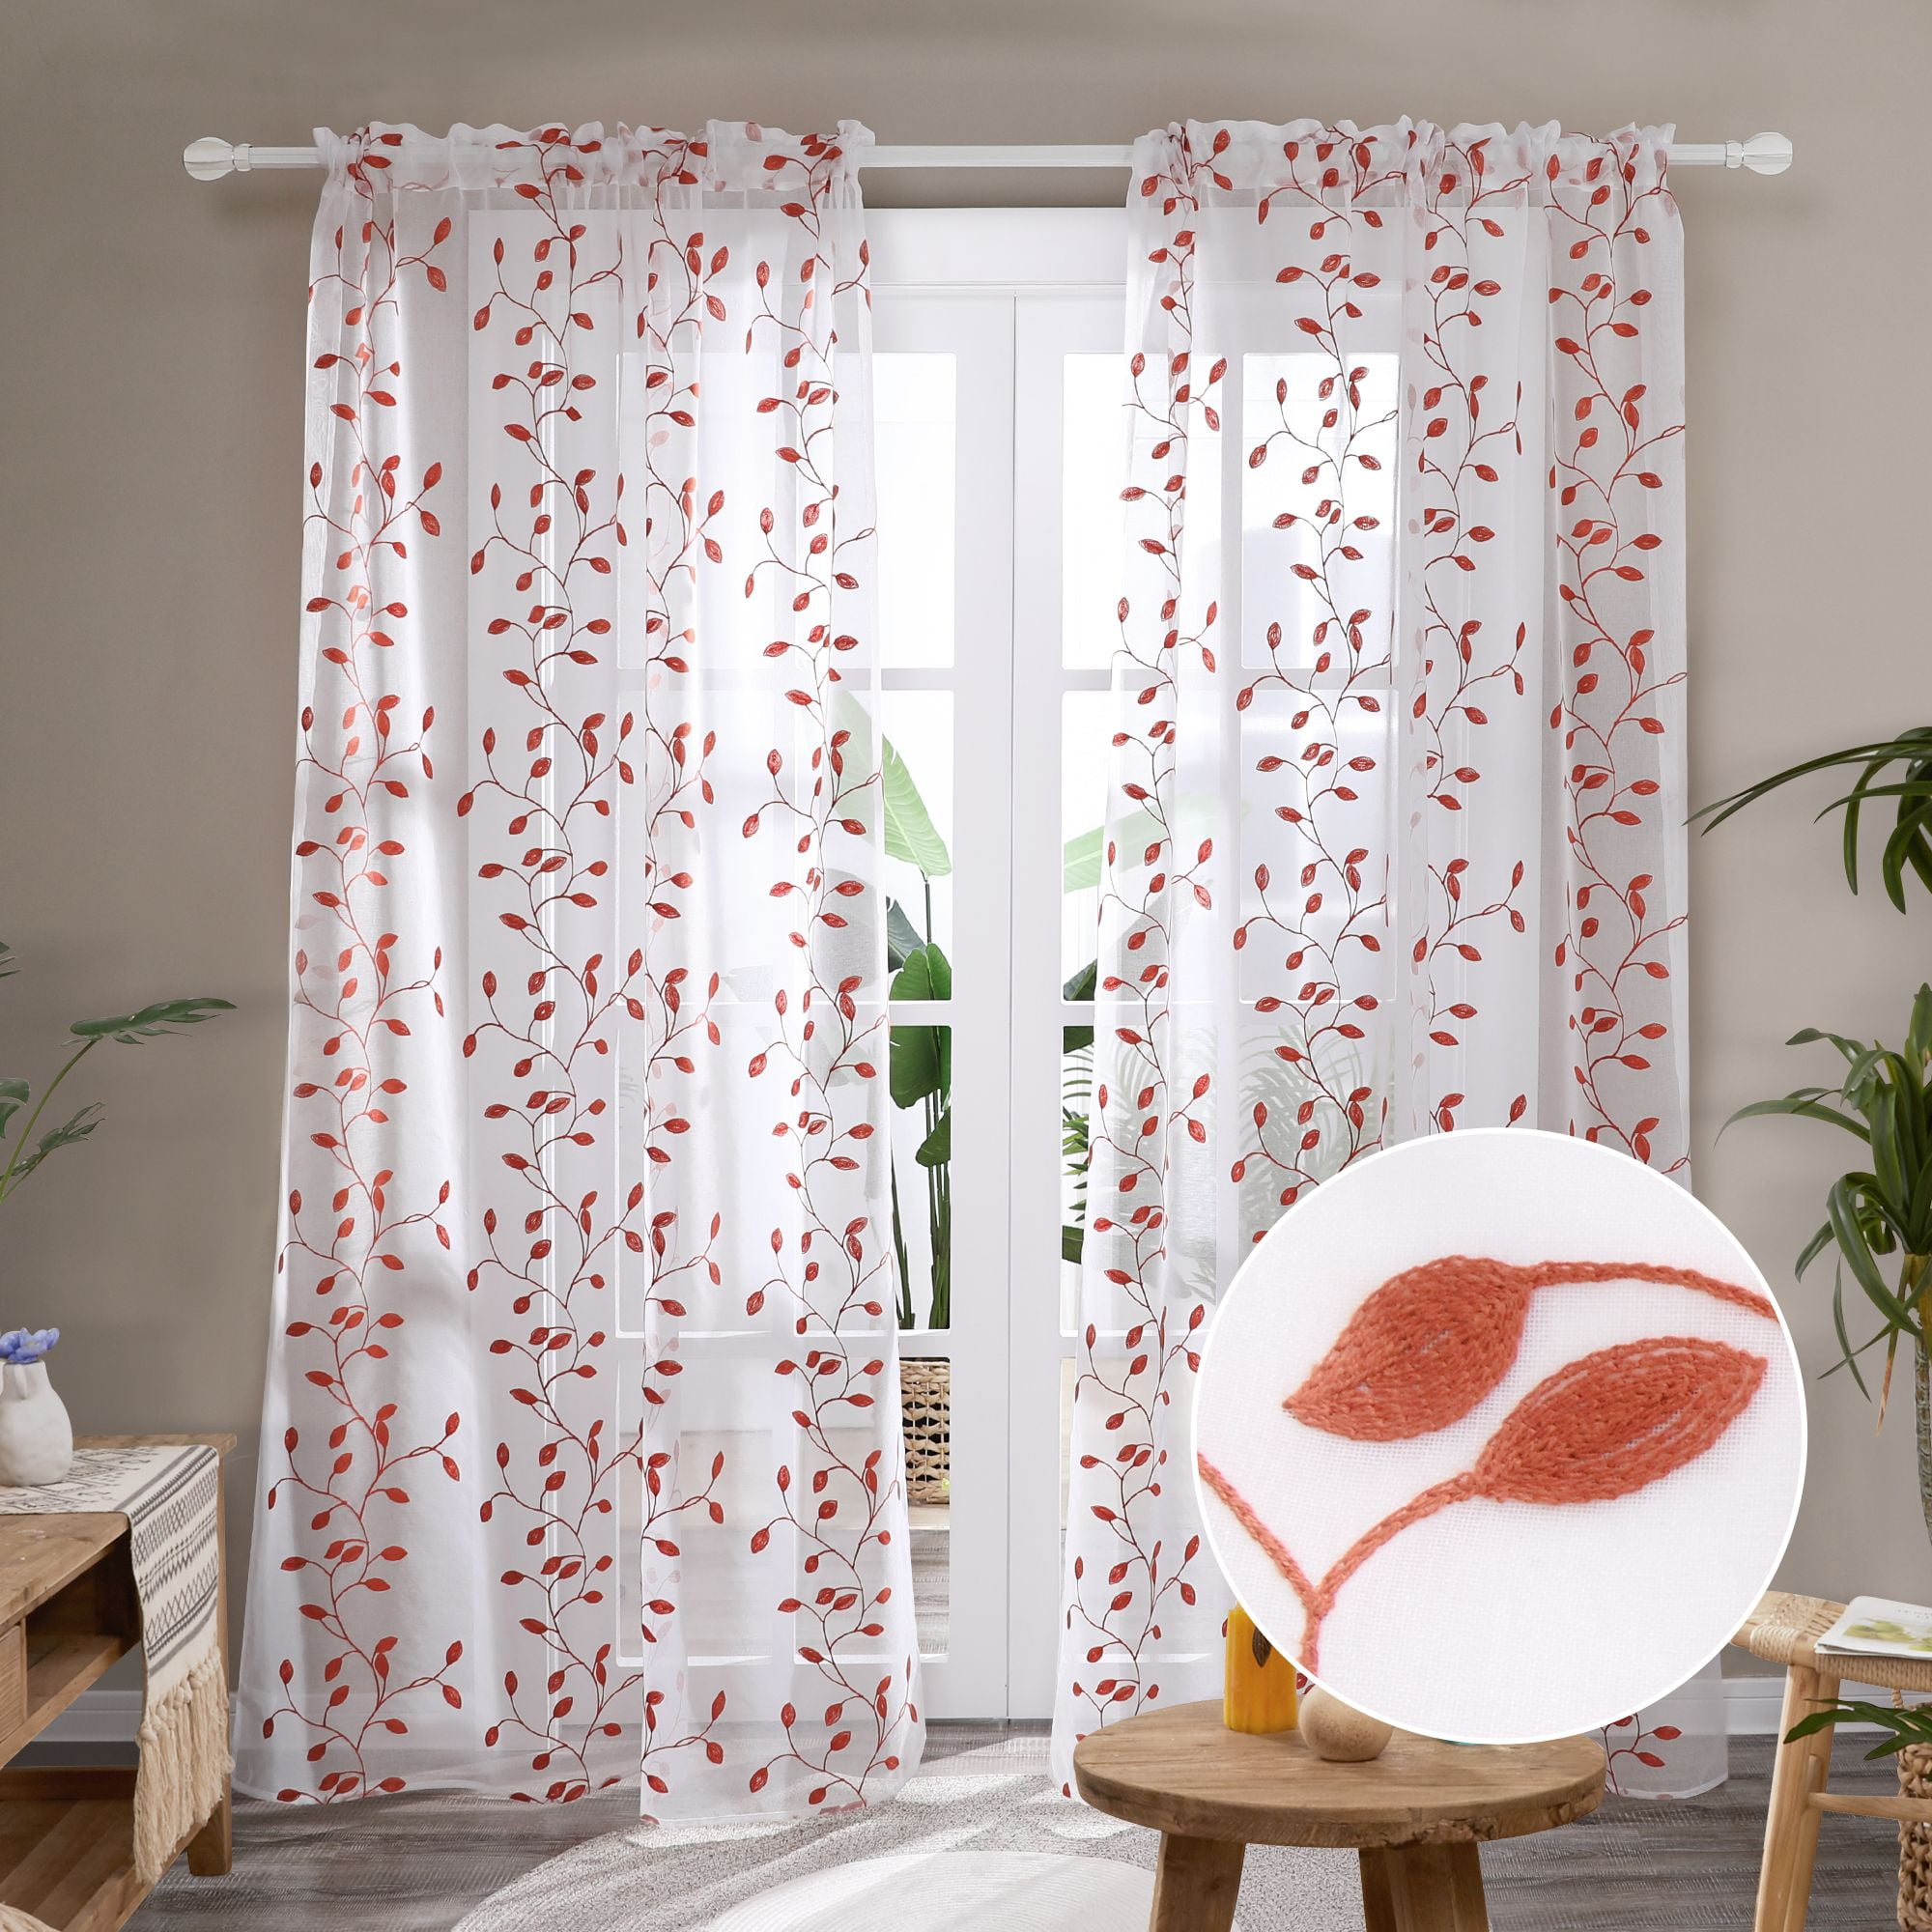 Grey Deconovo Back Tab Rod Pocket Cotton Floral Sheer Window Curtains for Girls Room 52x63 inch